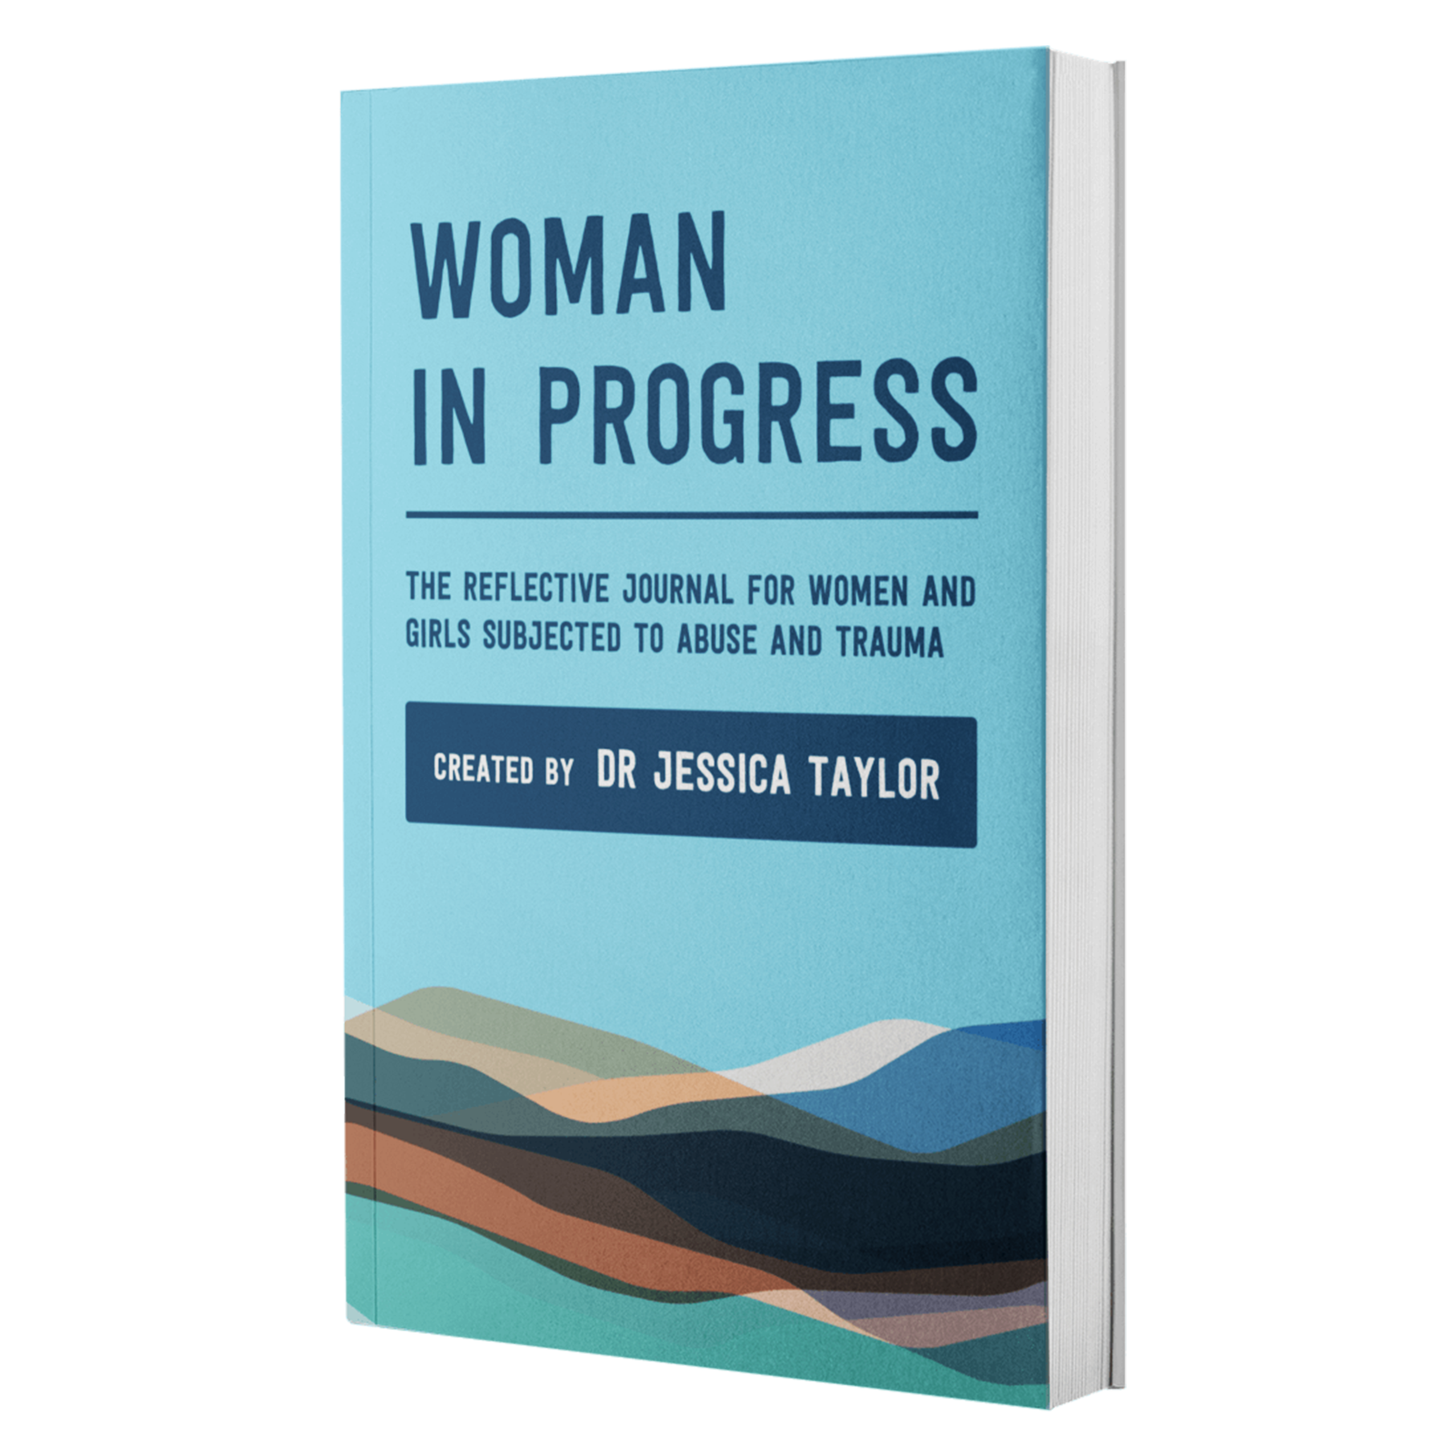 SIGNED & personalised: Woman in Progress: The Reflective Journal for Women and Girls Subjected to Abuse and Trauma